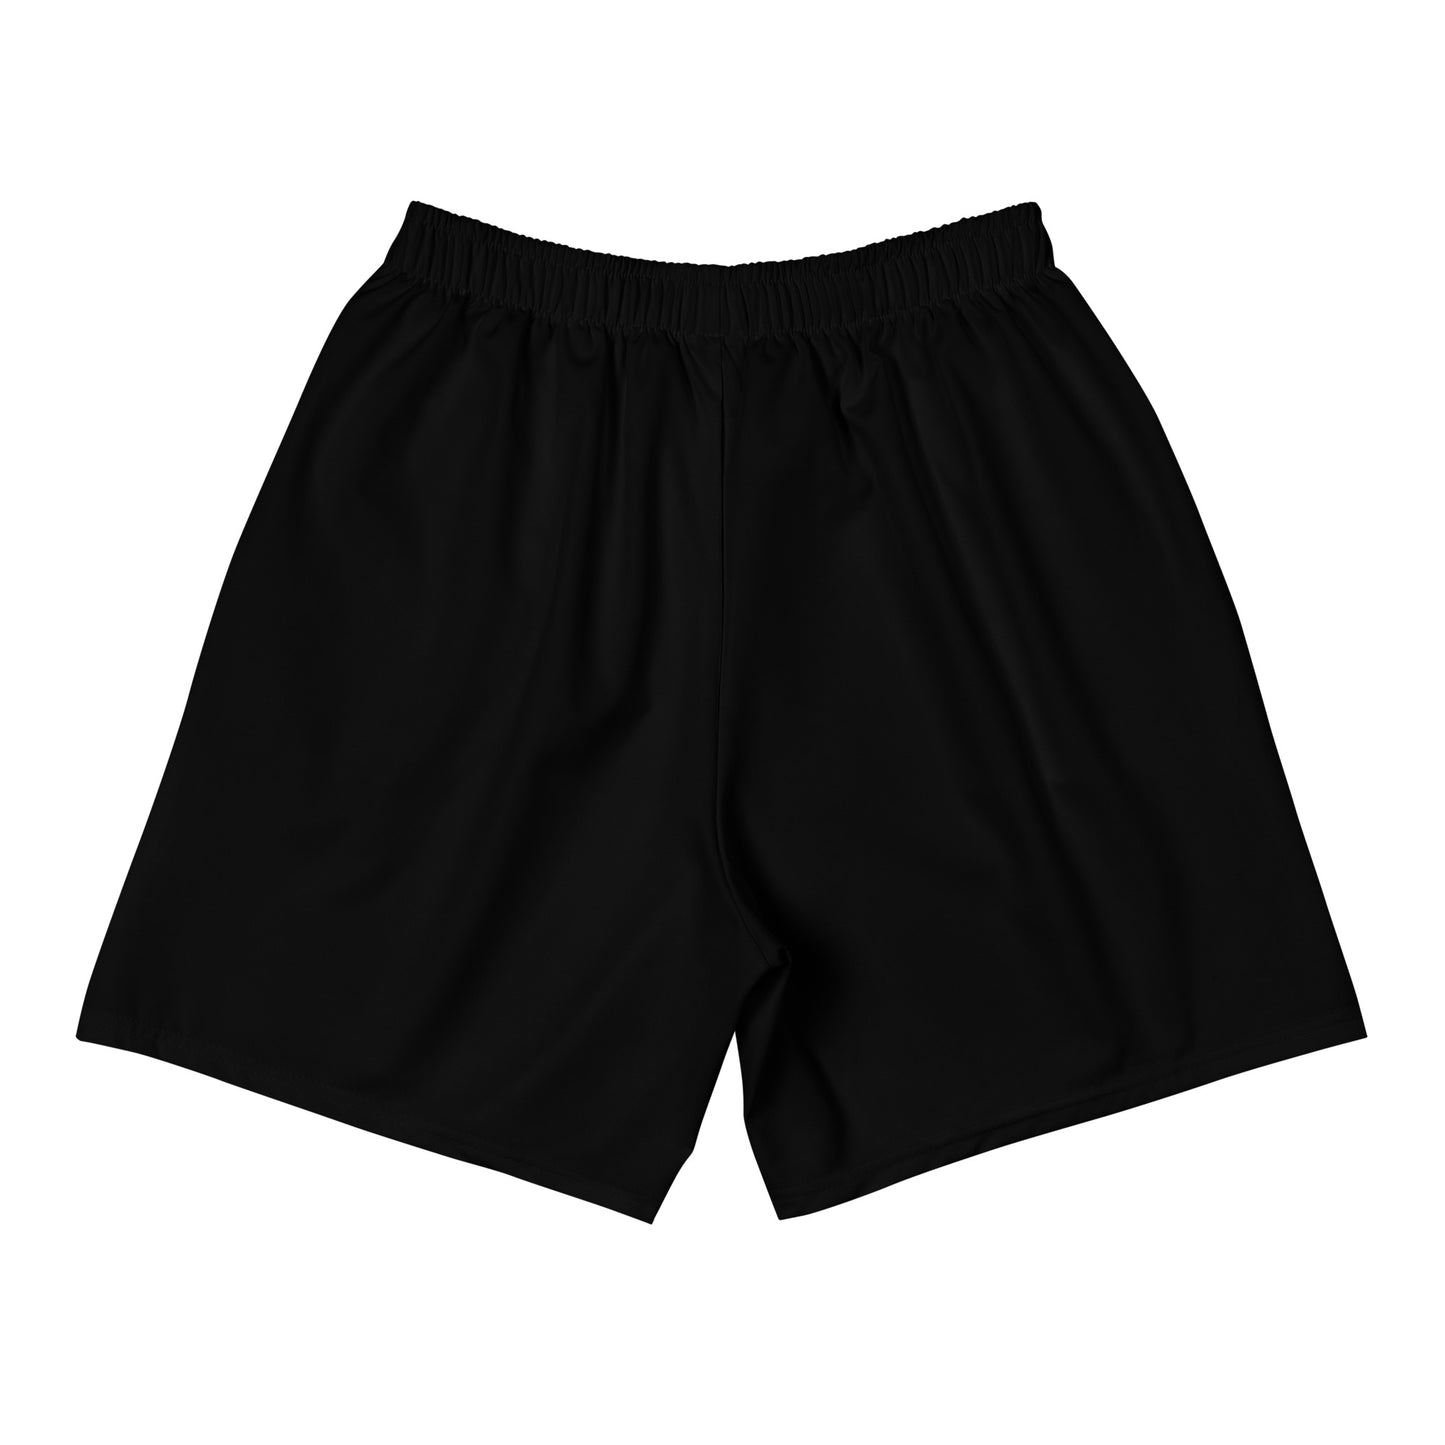 DRIVEN BARBELL Men's Recycled Athletic Shorts